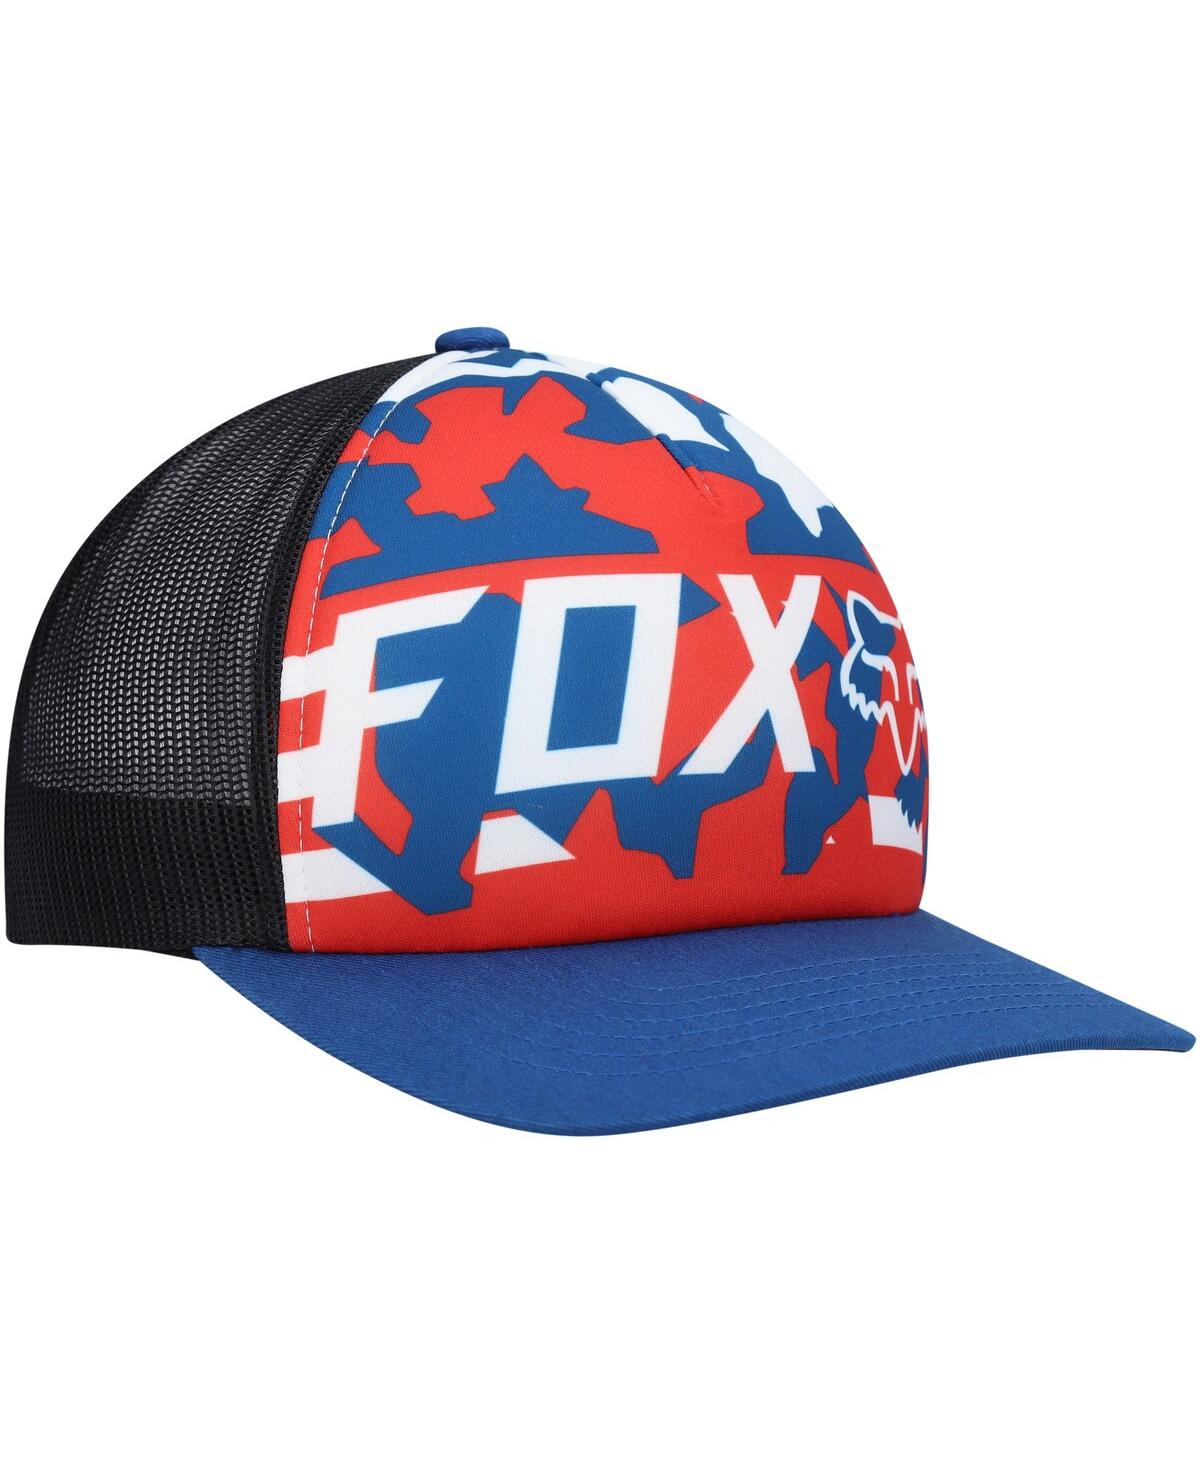 Shop Fox Men's  Royal, Black Red White And True Snapback Hat In Royal,black,red,white